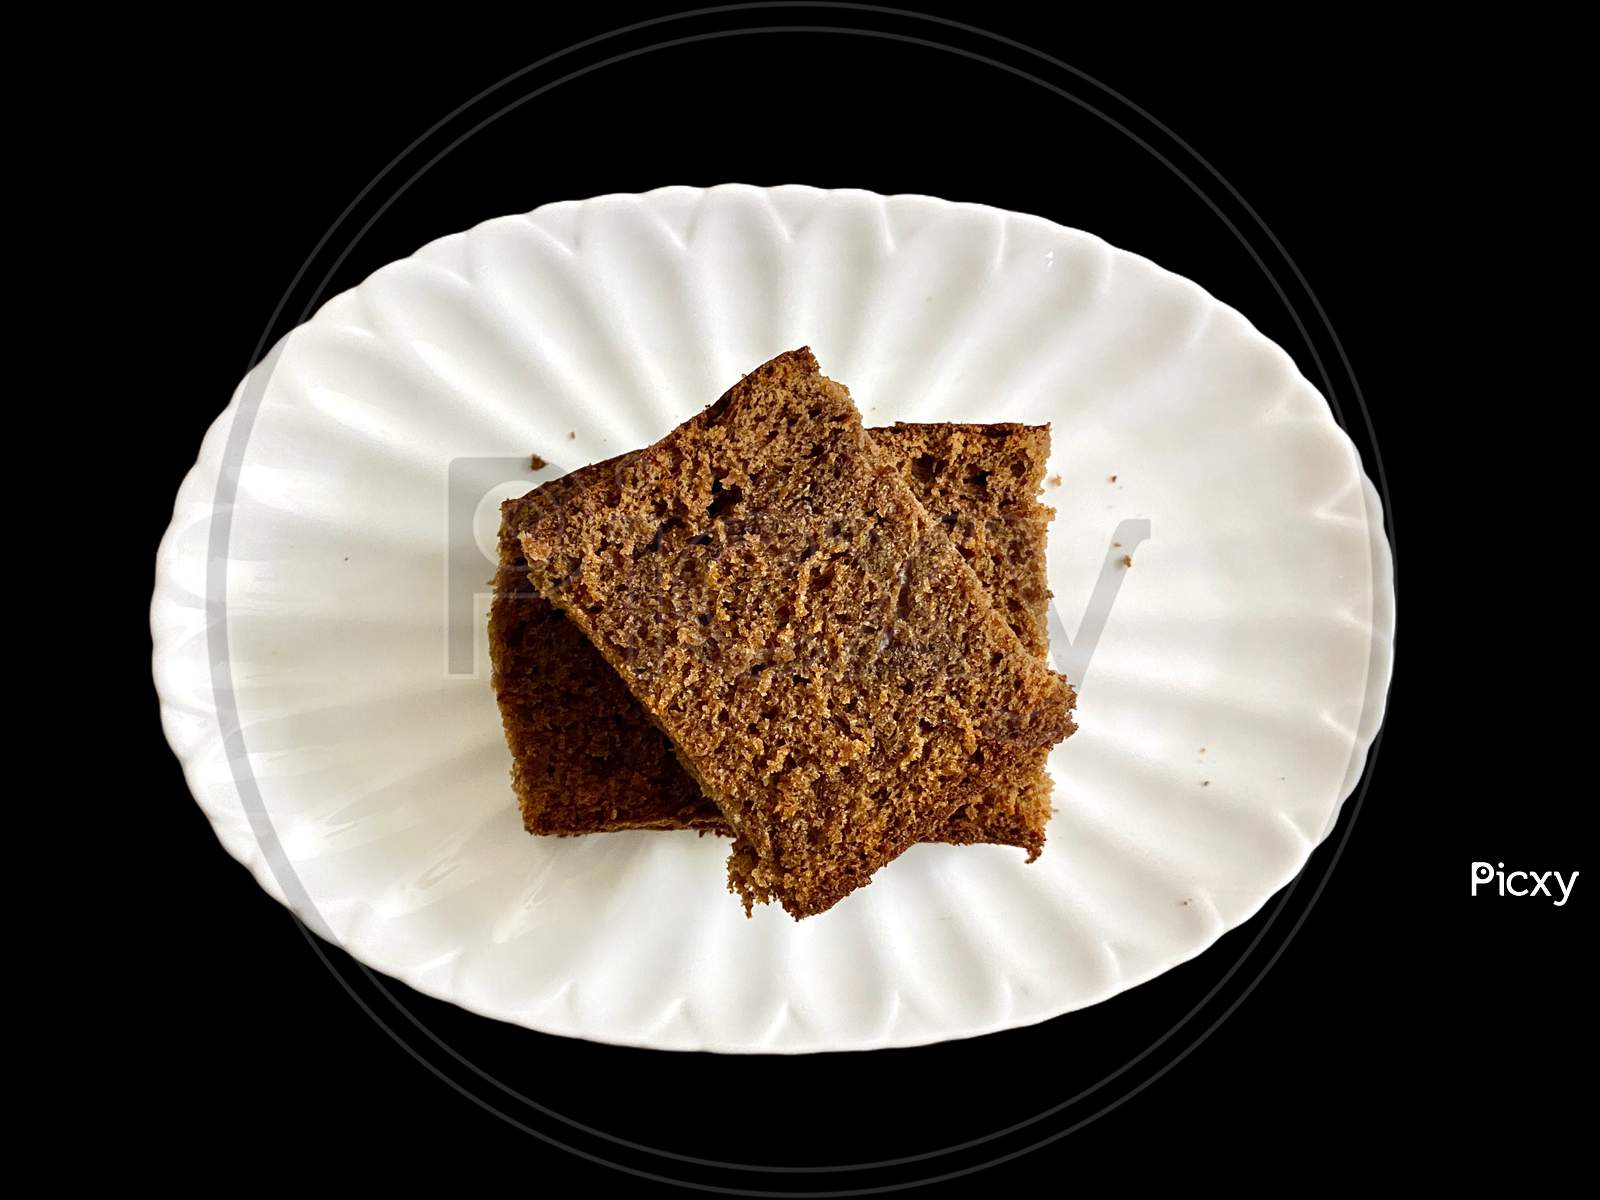 Plain Chocolate Cake Double Slice Being Served In A Plate